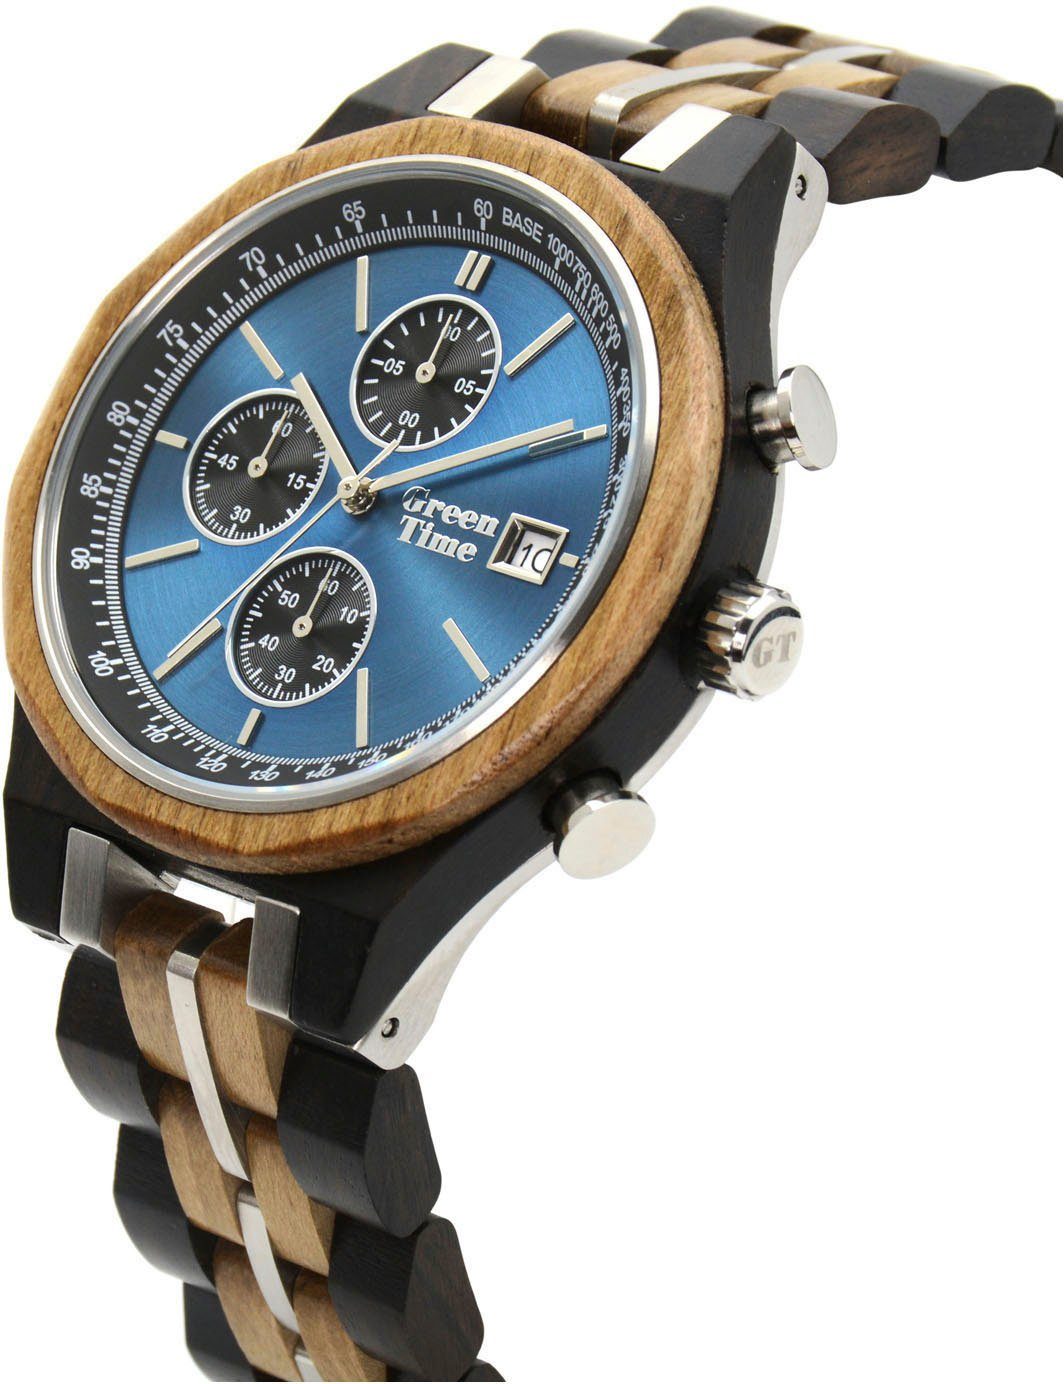 Chronograph Holz ZW176A, GreenTime